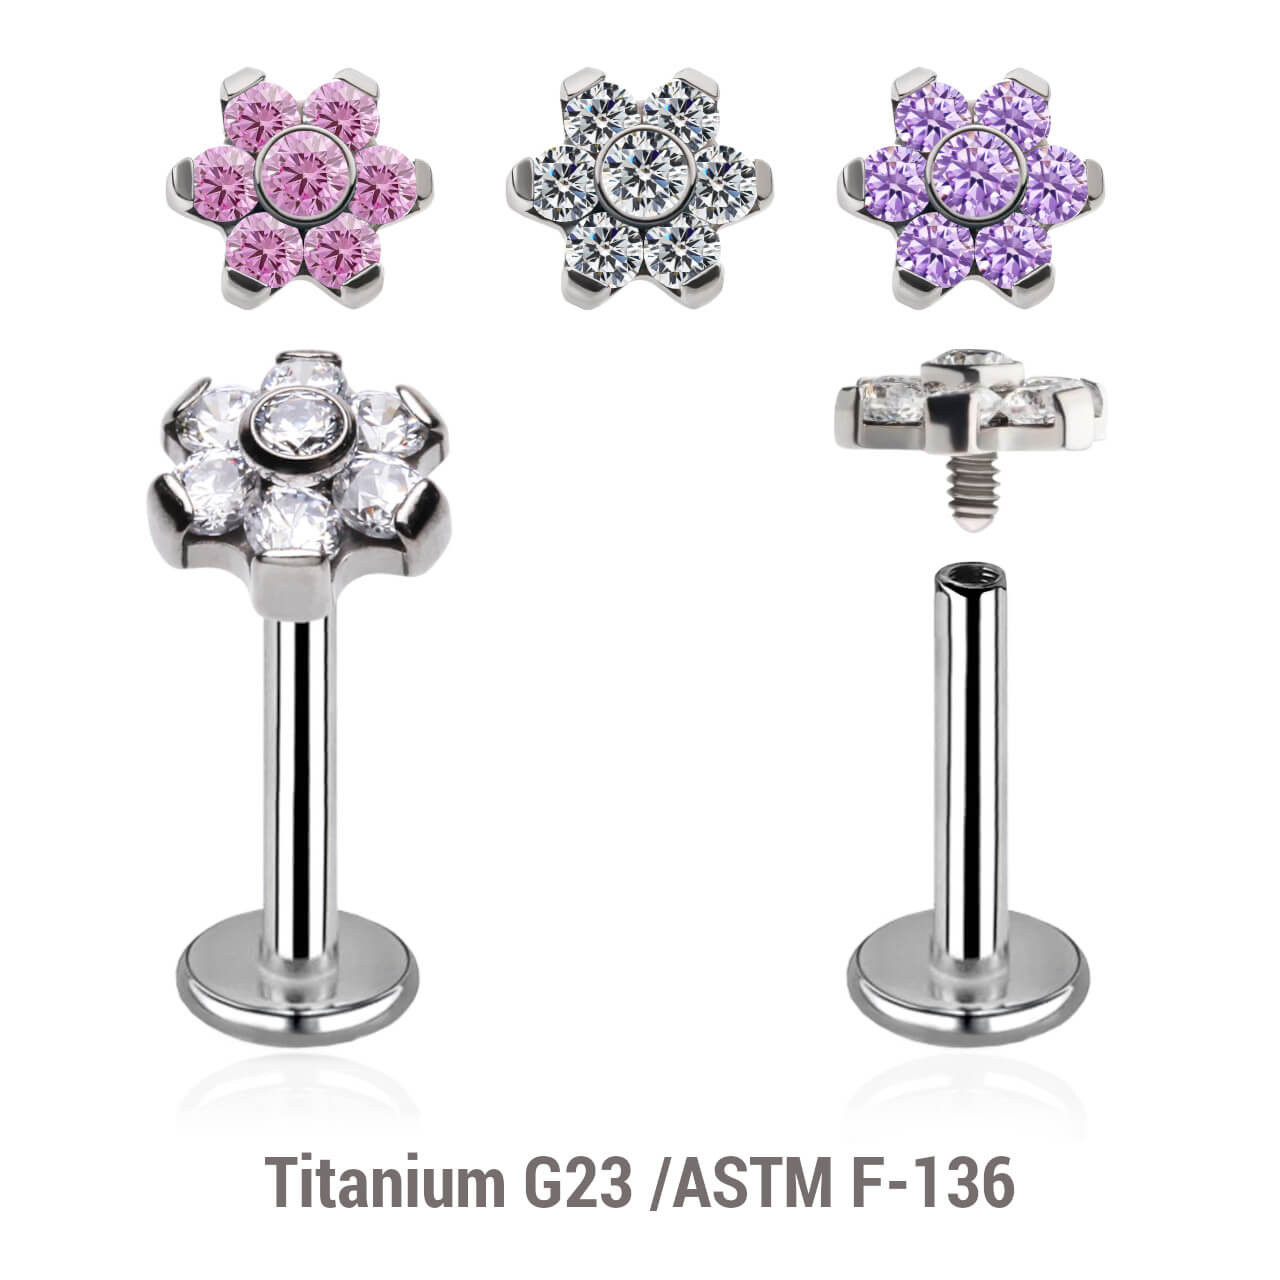 YLB12X01 Pack of 5 high polished titanium internally threaded labrets, Thickness 1.2mm, with 5mm flower shaped top with prong set CZ stones (1 central stone + 6 stones around)